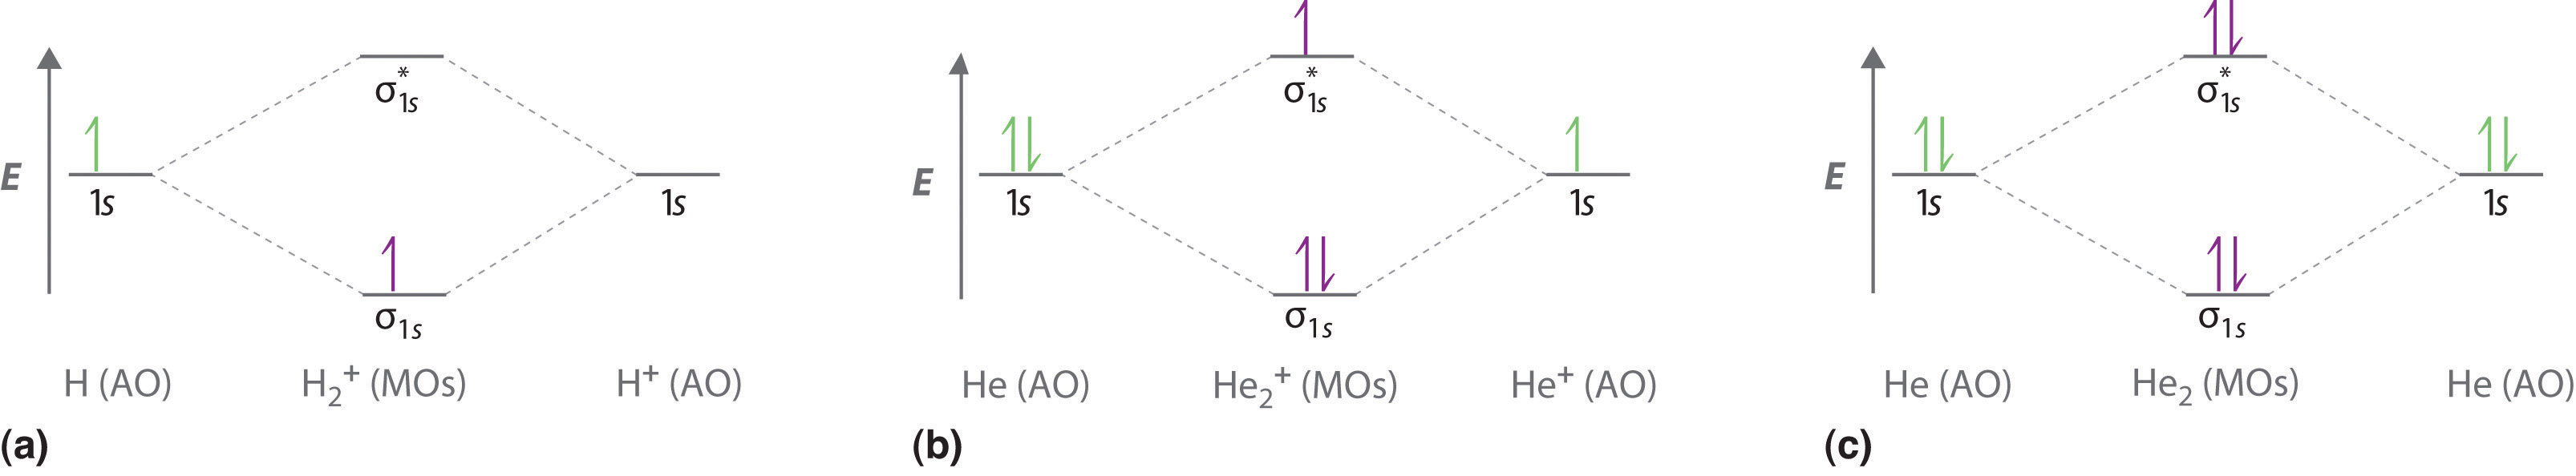 for the H2+ ion the H has one unpaired electron in the 1s orbital so the H2+ has one unpaired electron in the sigmas 1 s orbital. for He2+ ion, He has a full 1 s orbital and He+ has one upaired electron in the 1 s orbital. This means that the sigmal 1s orbital is full and the sigmal*1s orbital has one upaired electron. For the He2 molecule, each He has a full 1 s orbital. This means that sigma 1s and sigma * 1s orbital are full. 